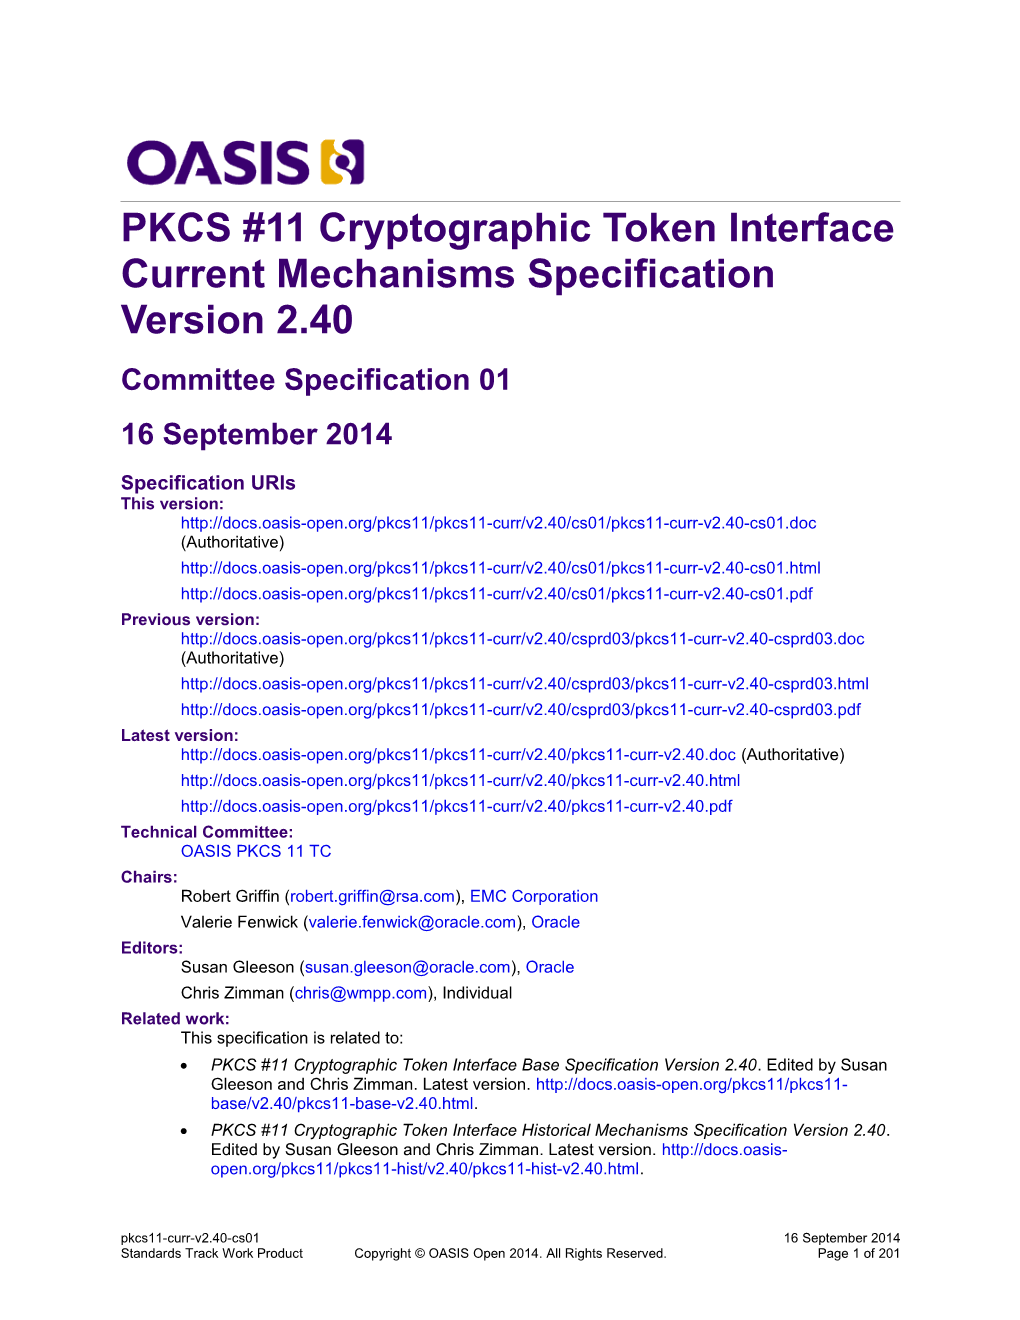 PKCS #11 Cryptographic Token Interface Current Mechanisms Specification Version 2.40 s2